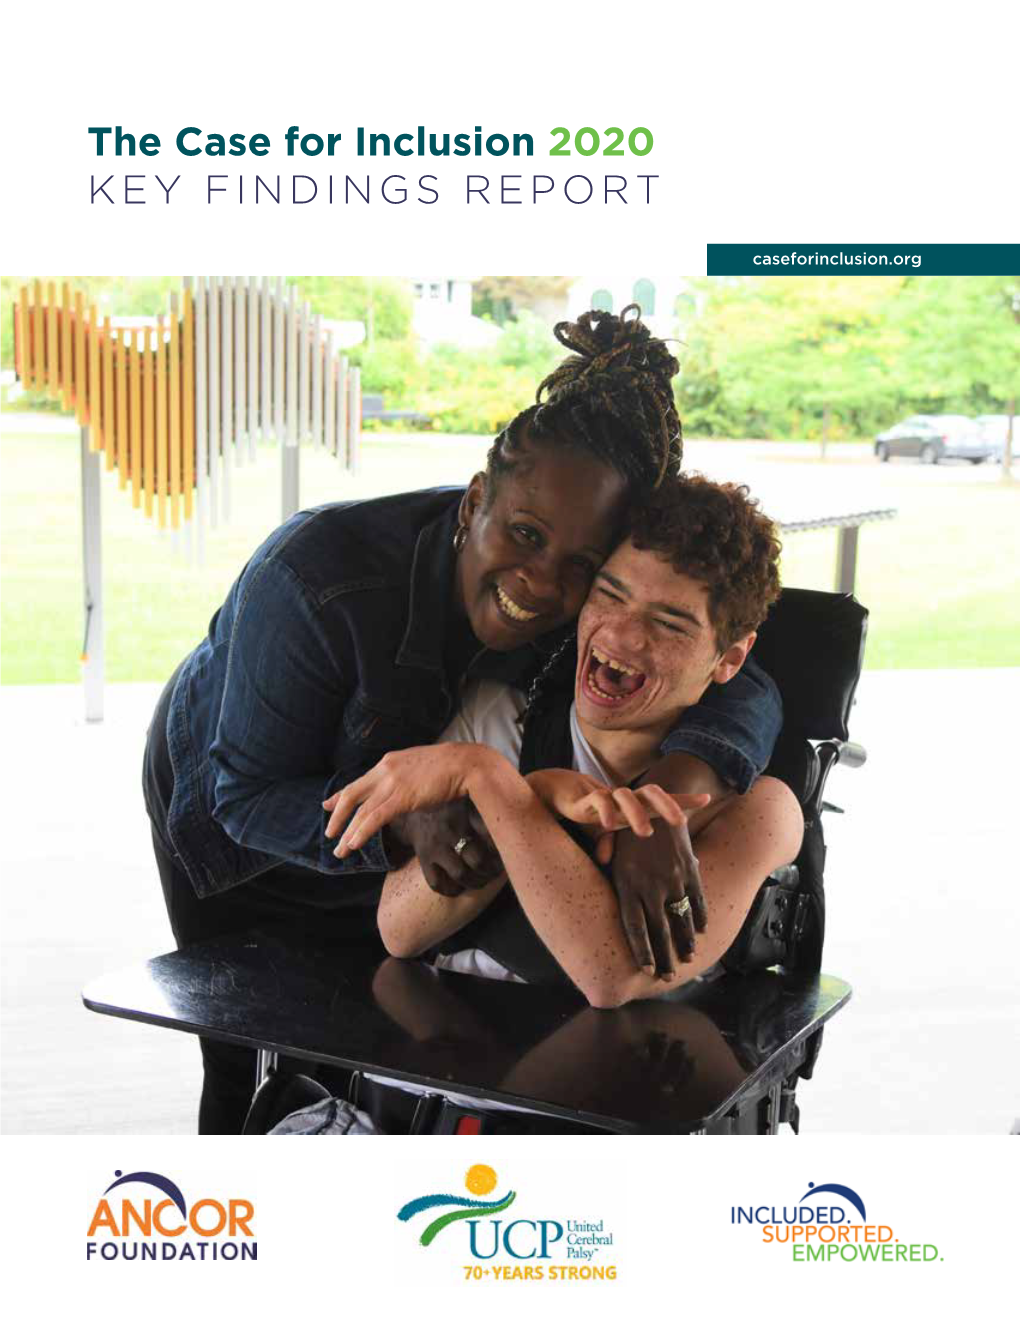 The Case for Inclusion 2020 KEY FINDINGS REPORT